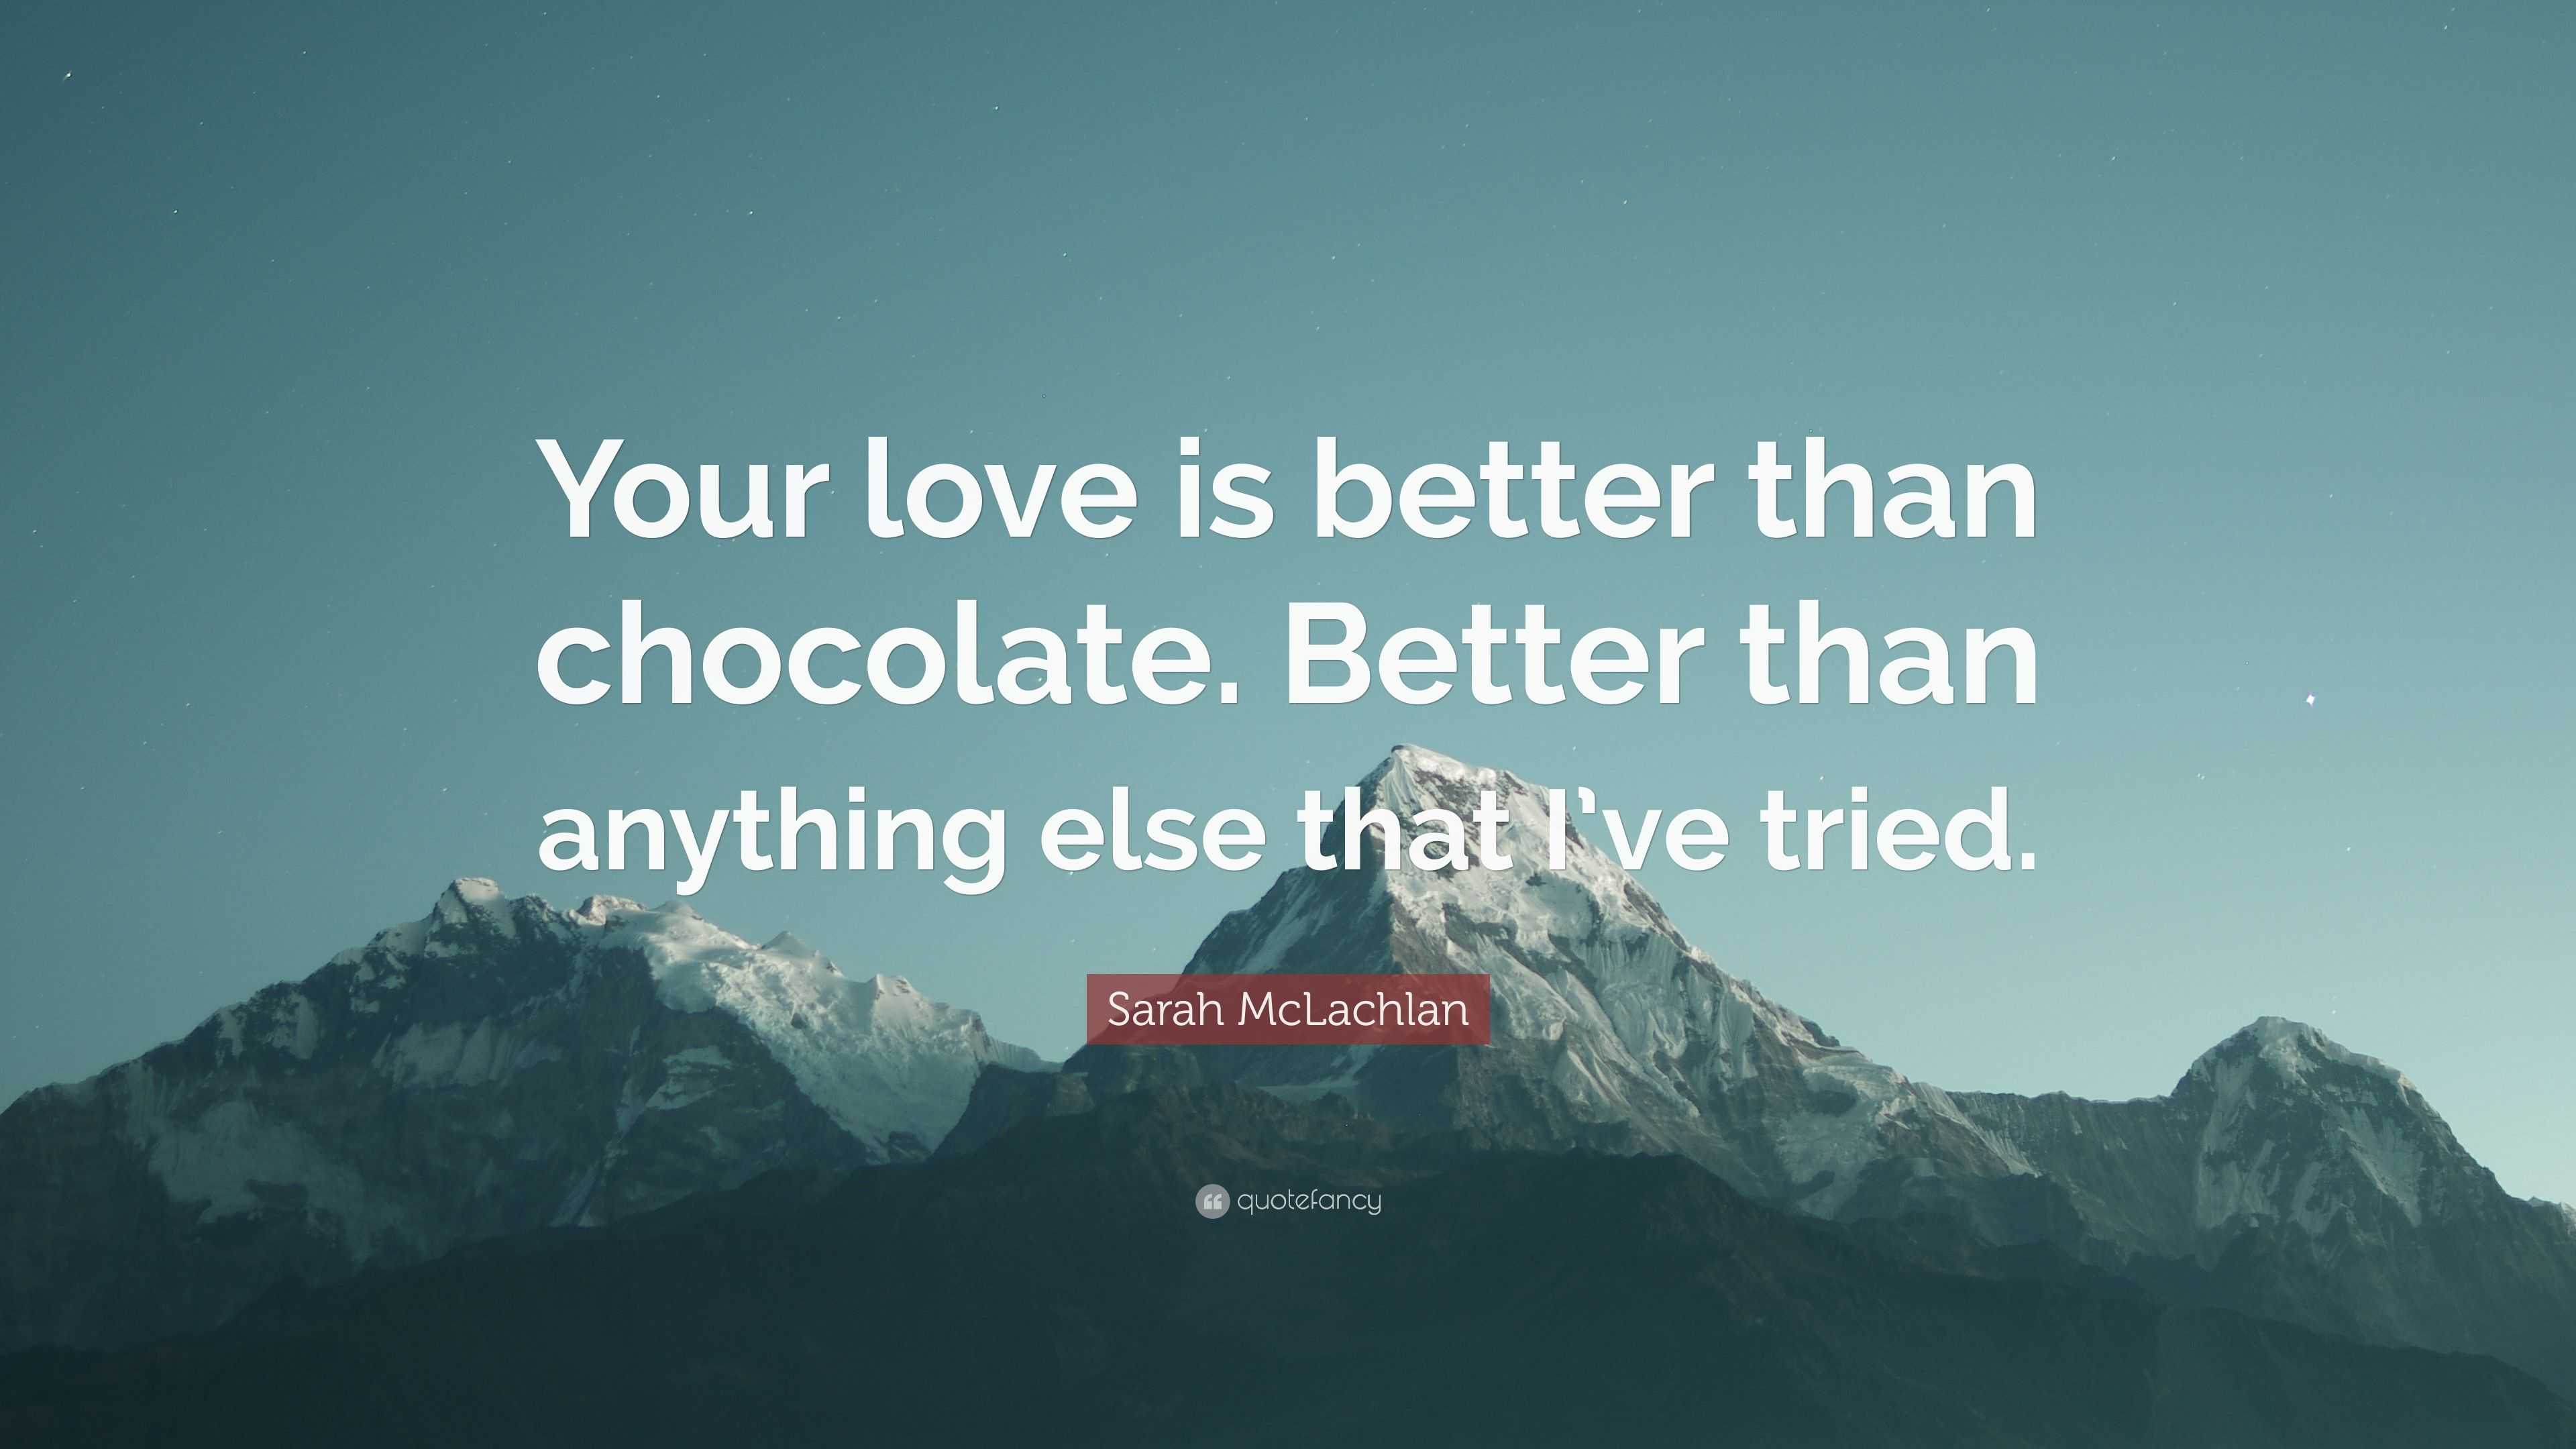 Sarah McLachlan Quote “Your love is better than chocolate Better than anything else